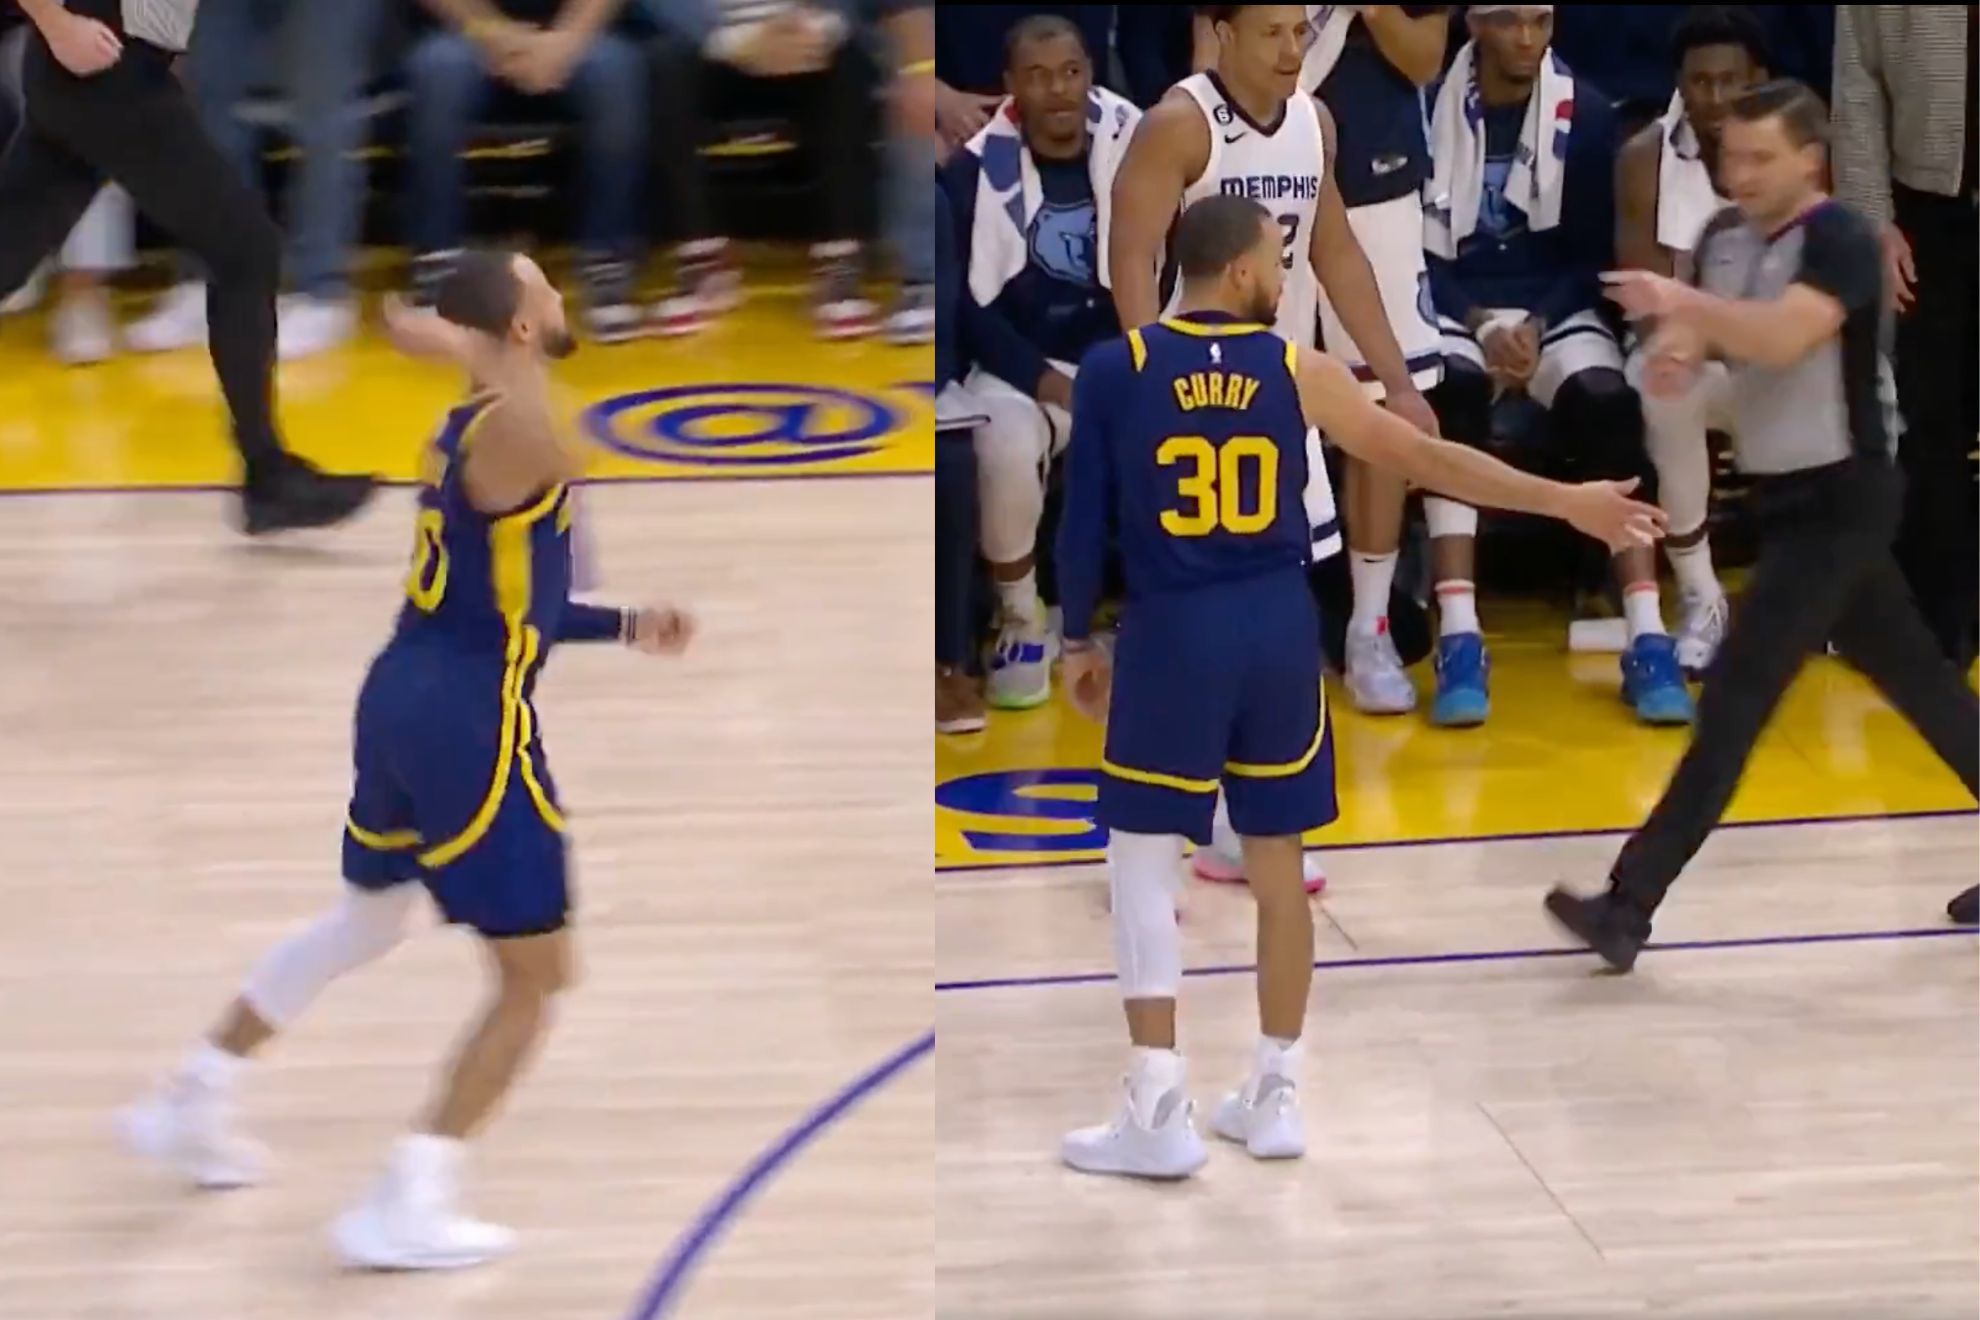 Steph Curry gets ejected by refs and fans unite in condemning officials